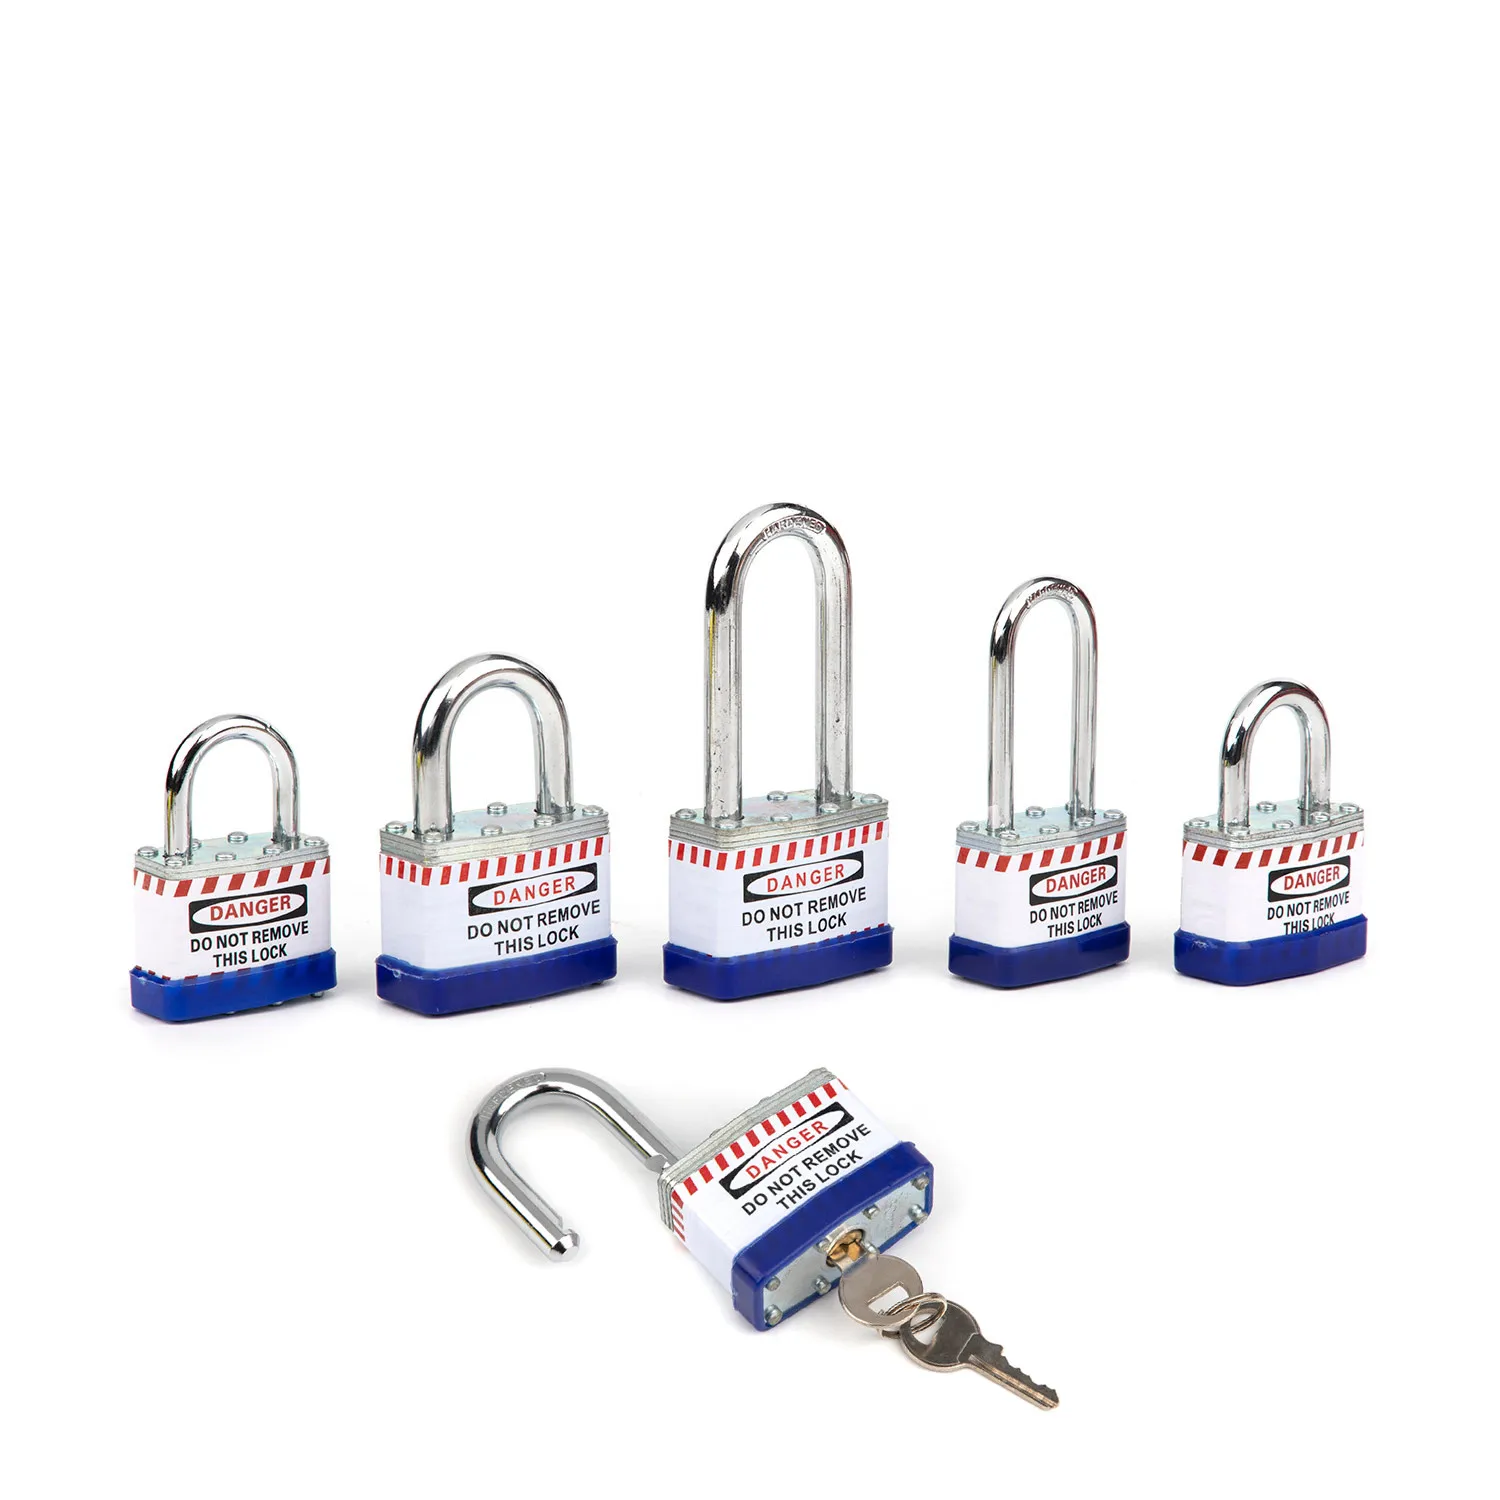 Laminated steel Loto safety padlock with hardened steel shackle for Industrial equipment lockout